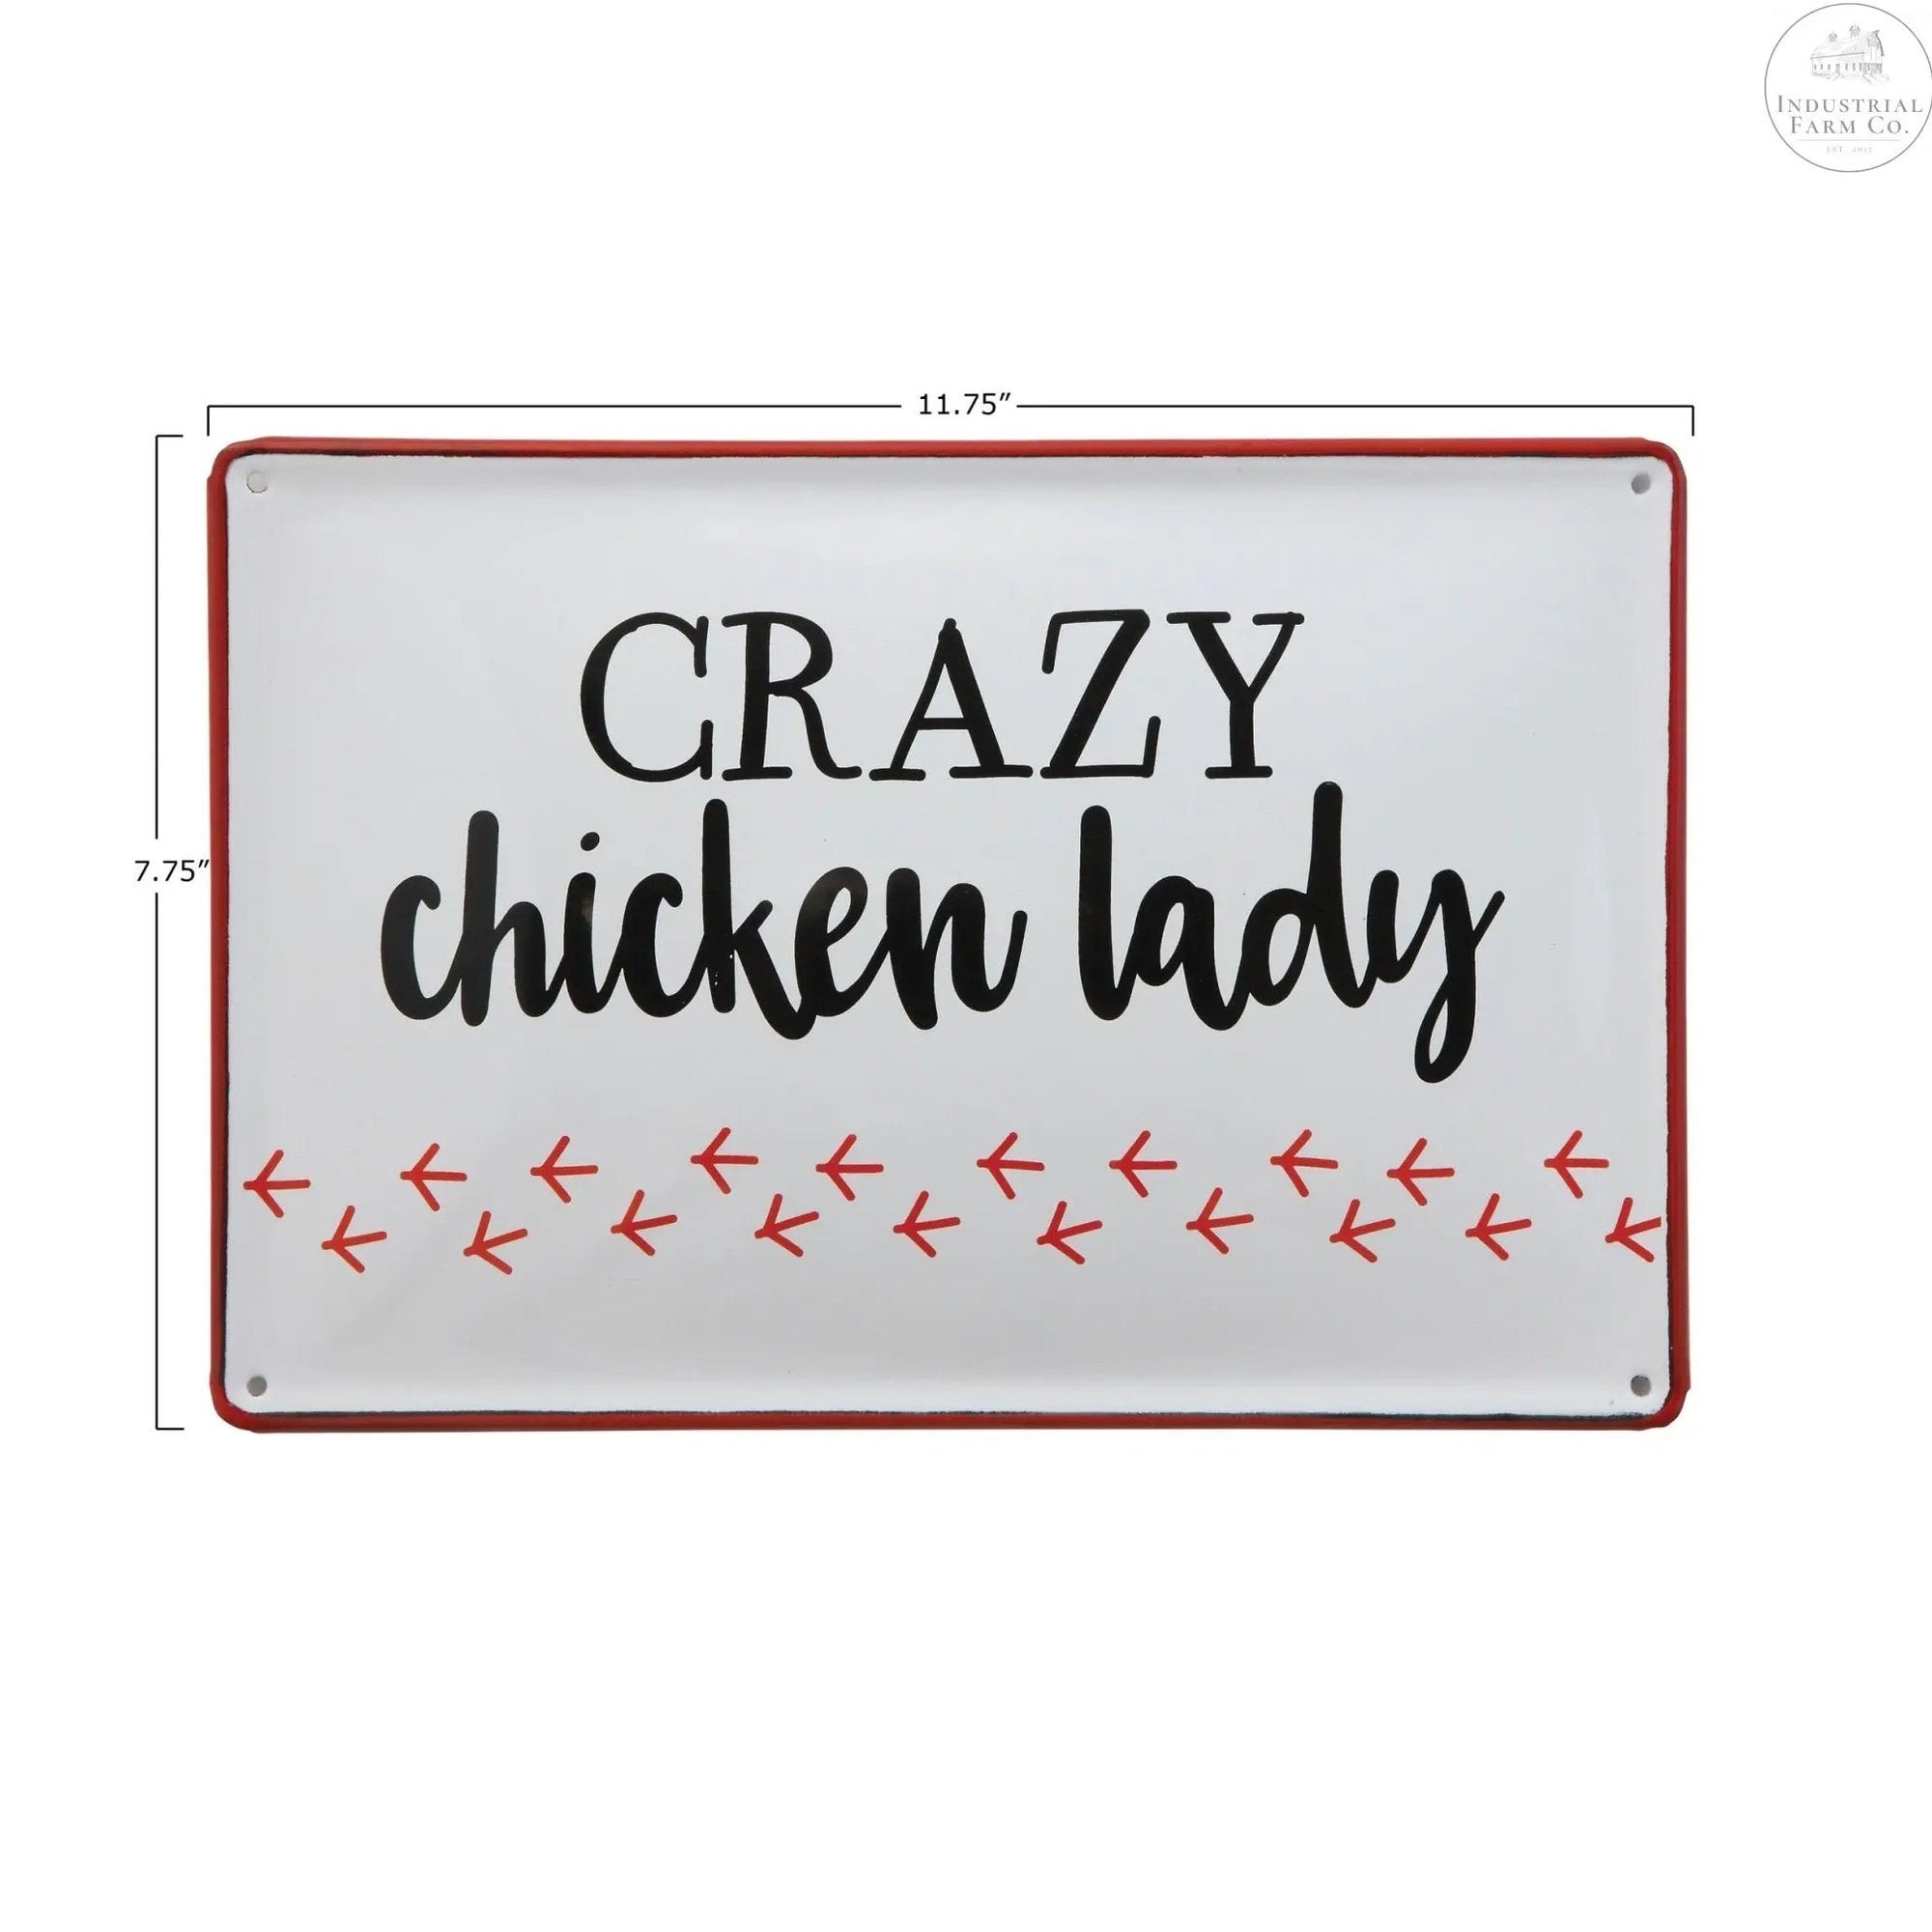 Chicken Lady Sign | Industrial Farm Co